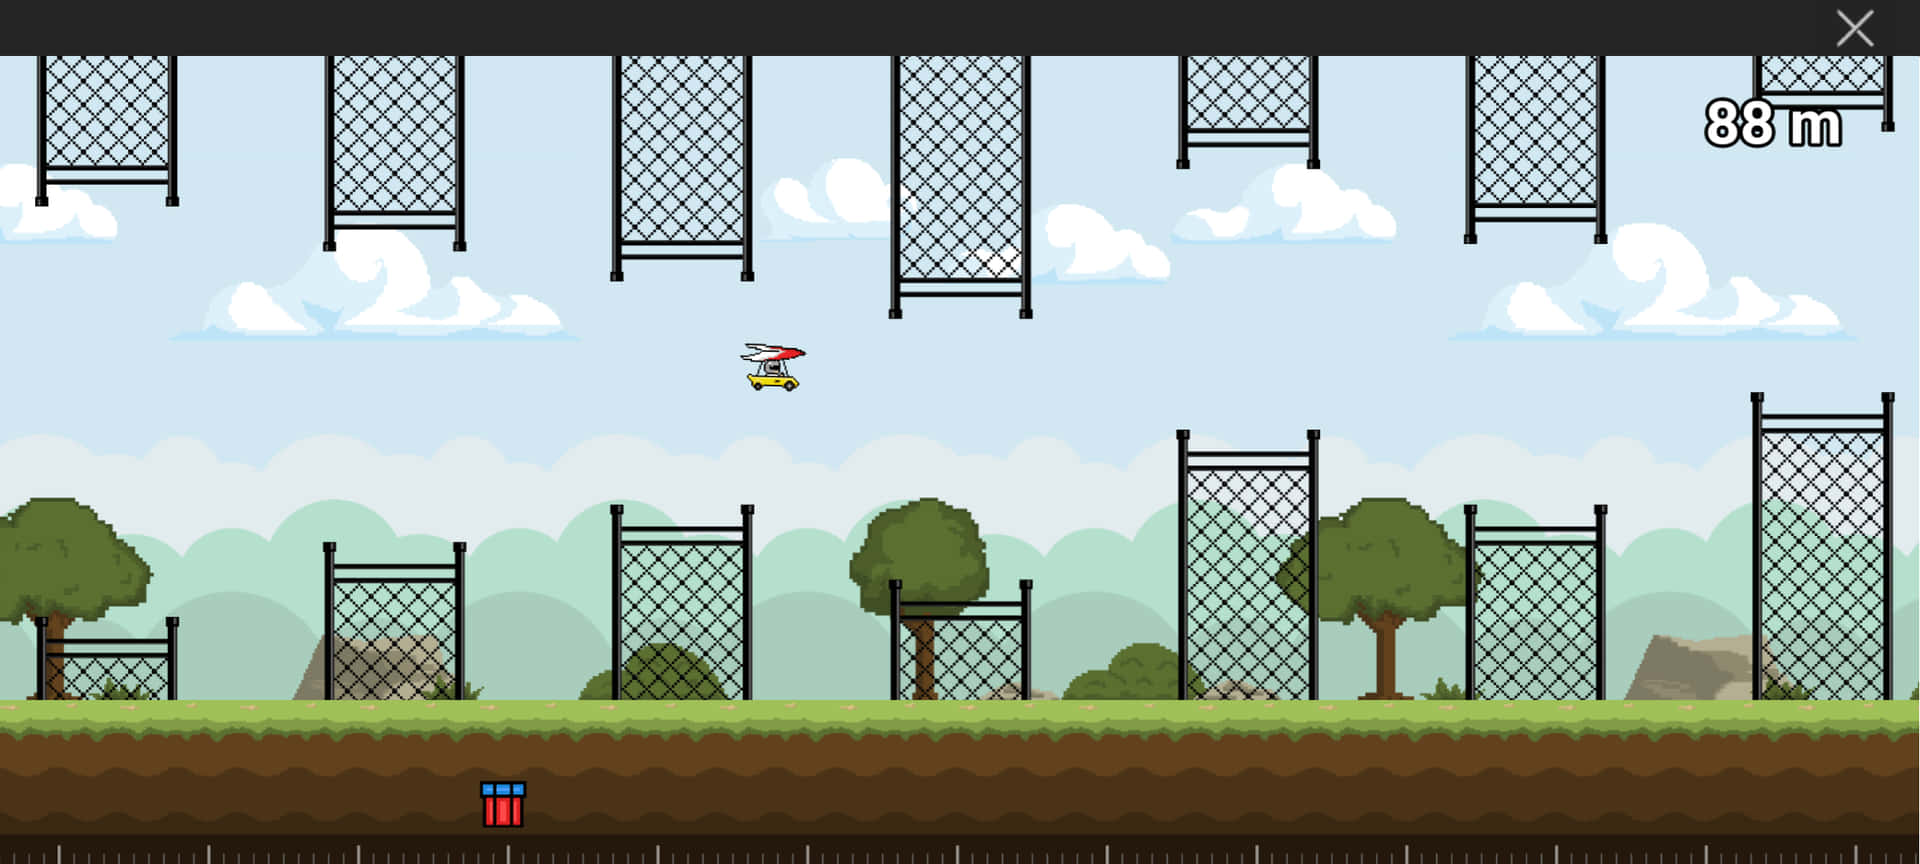 A Game With A Screen Showing A Flying Game